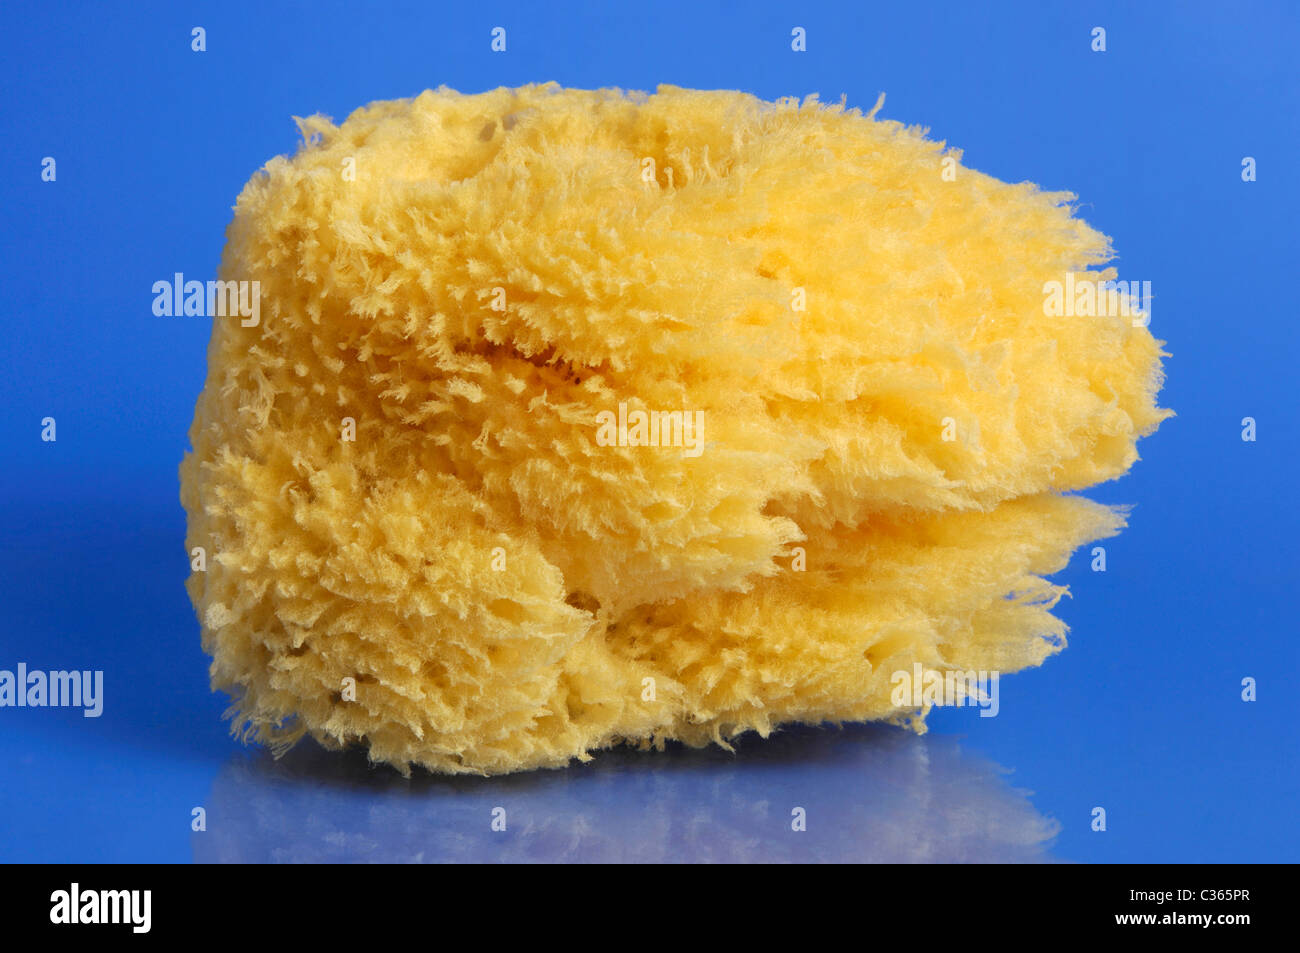 Natural sea sponge from Cyprus Isolated on blue background Stock Photo